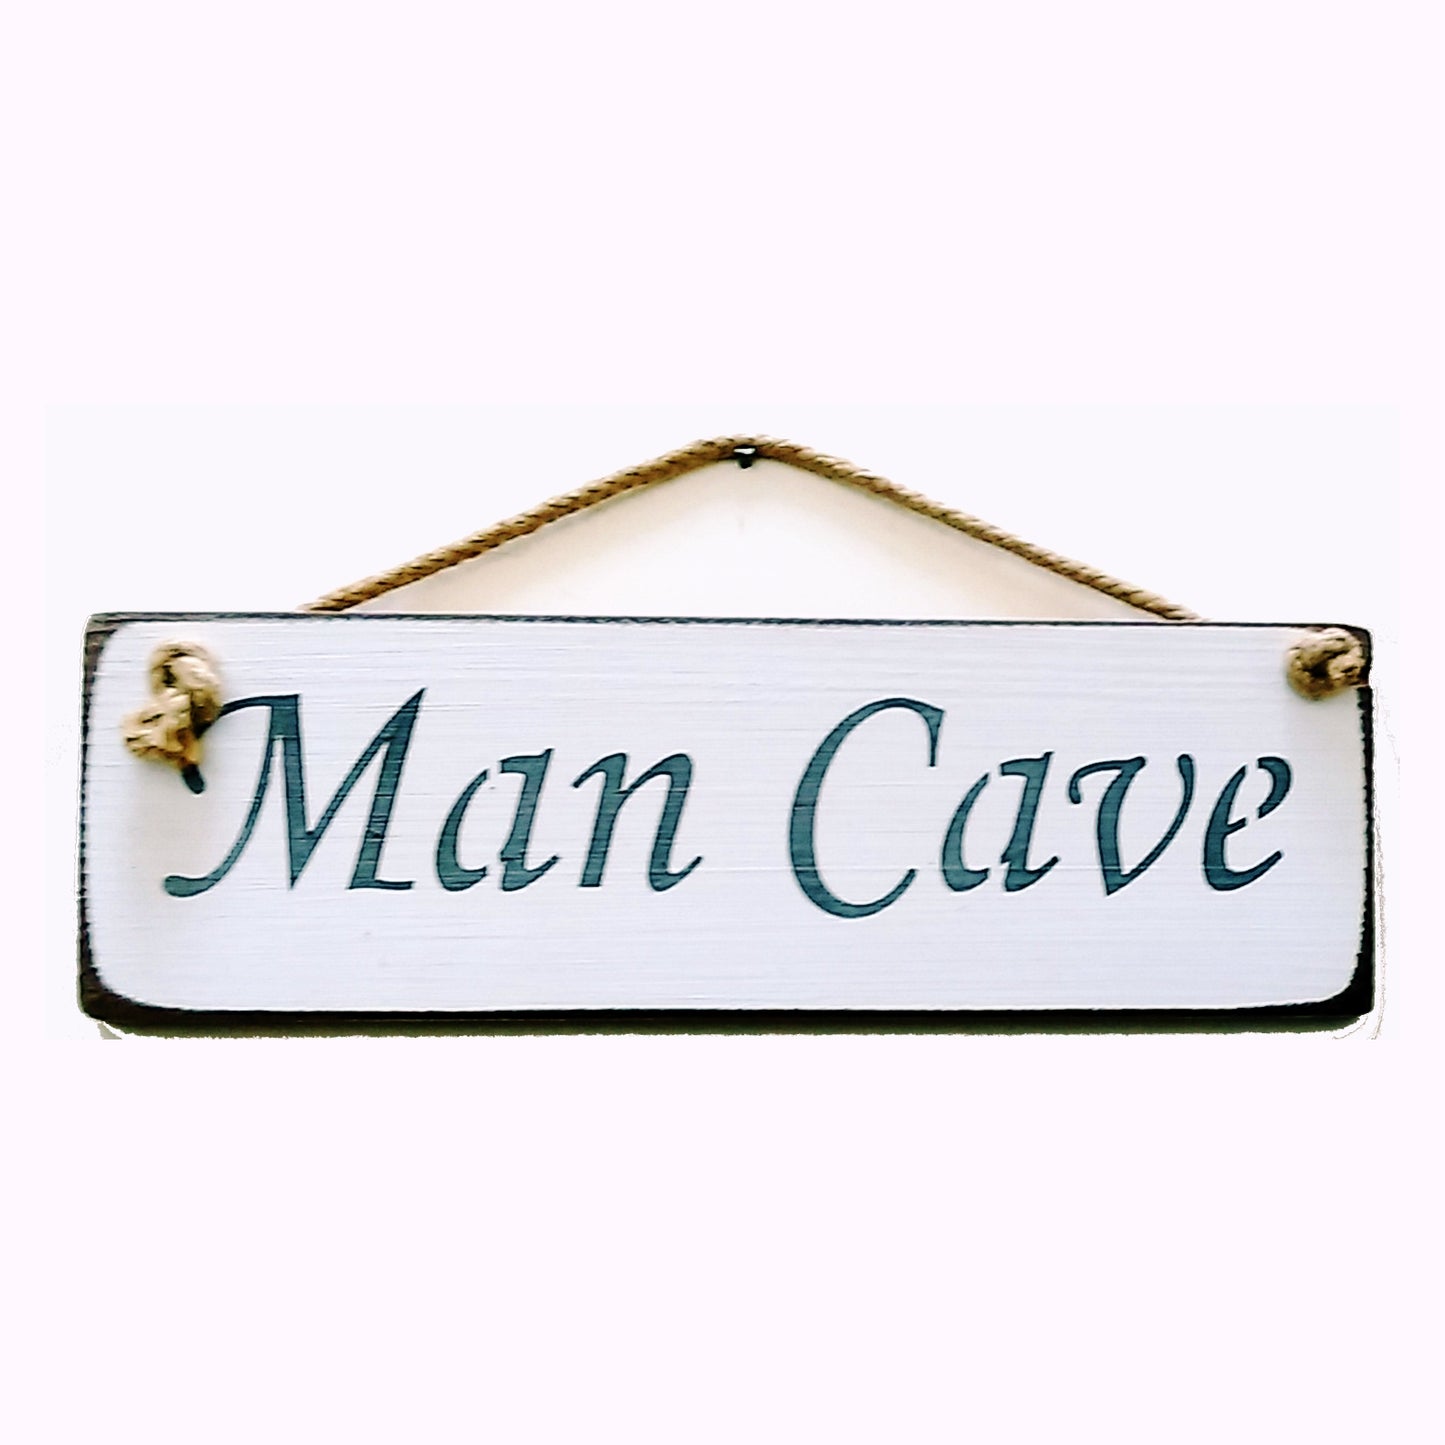 Man Cave - Vintage shabby chic Wooden Sign